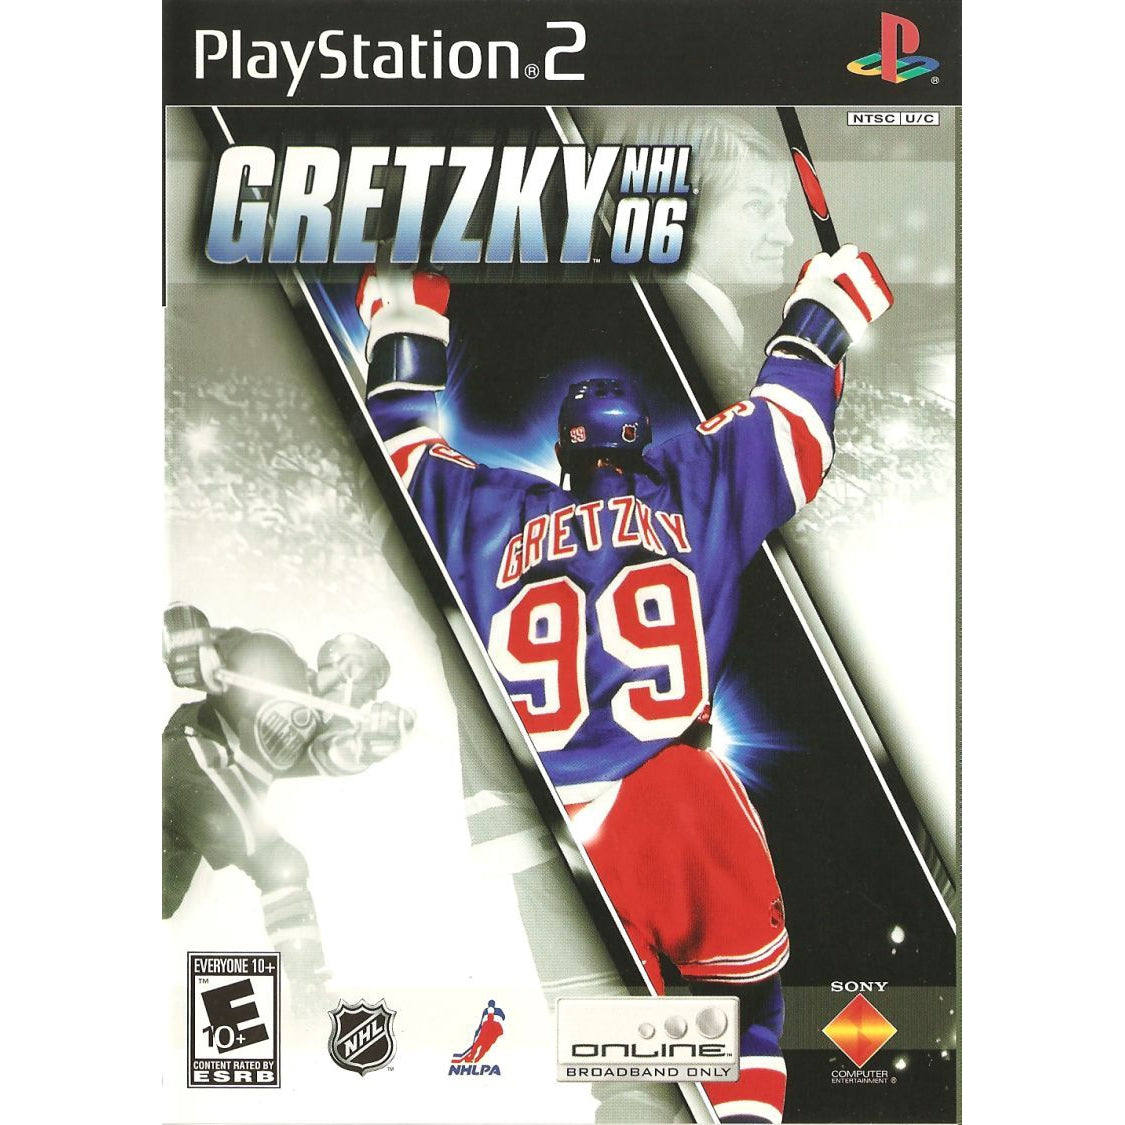 Gretzky NHL 06 - PlayStation 2 (PS2) Game Complete - YourGamingShop.com - Buy, Sell, Trade Video Games Online. 120 Day Warranty. Satisfaction Guaranteed.